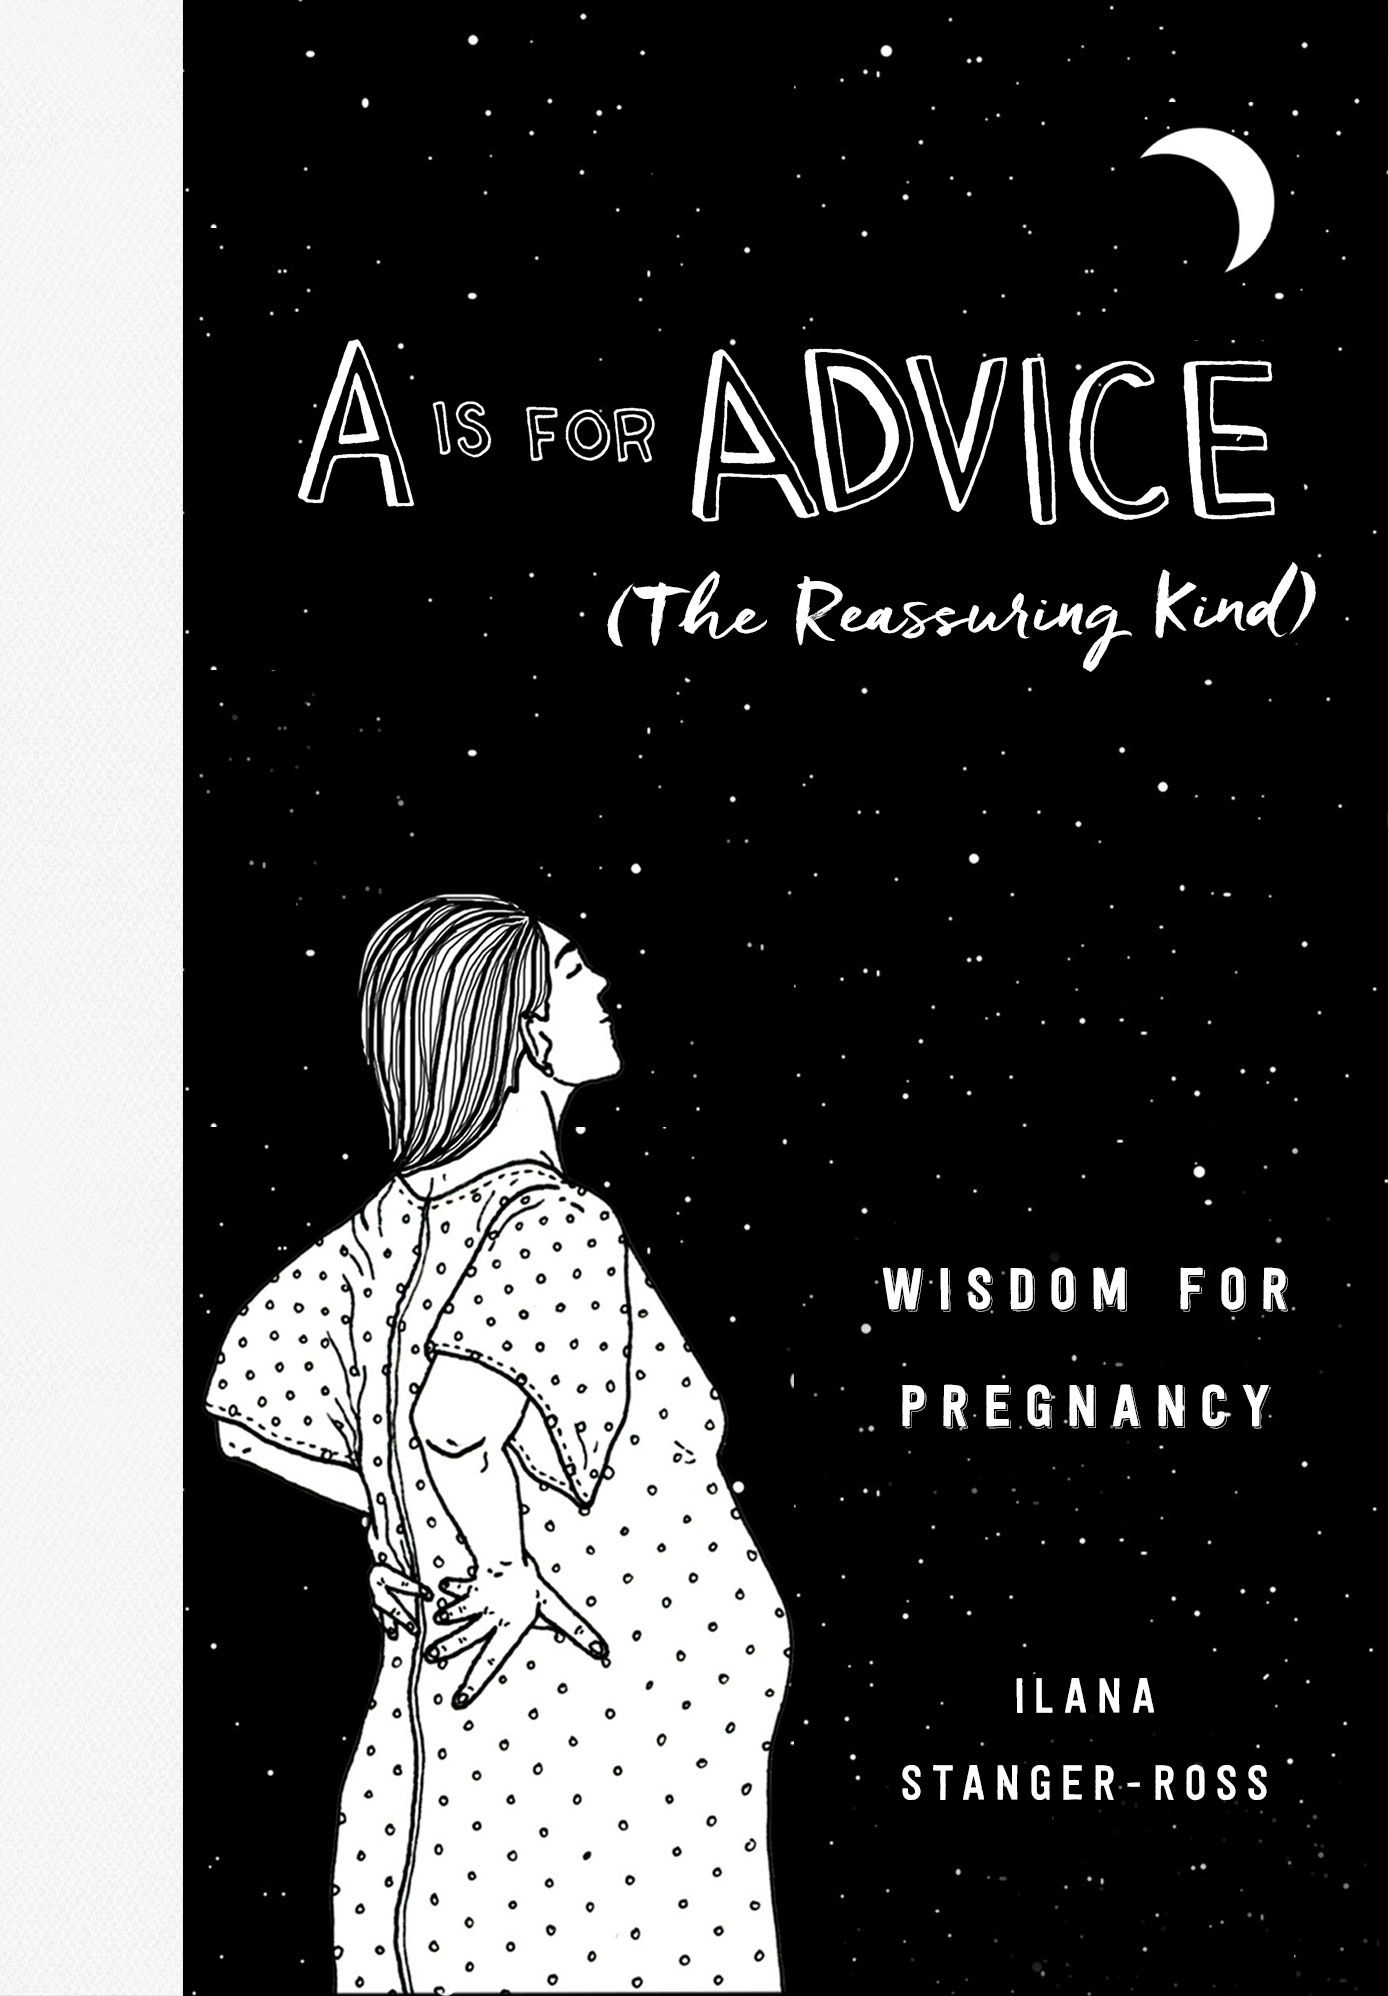 Book Launch: A is for Advice by Ilana Stanger-Ross in conversation with Sarah Lux-Lee